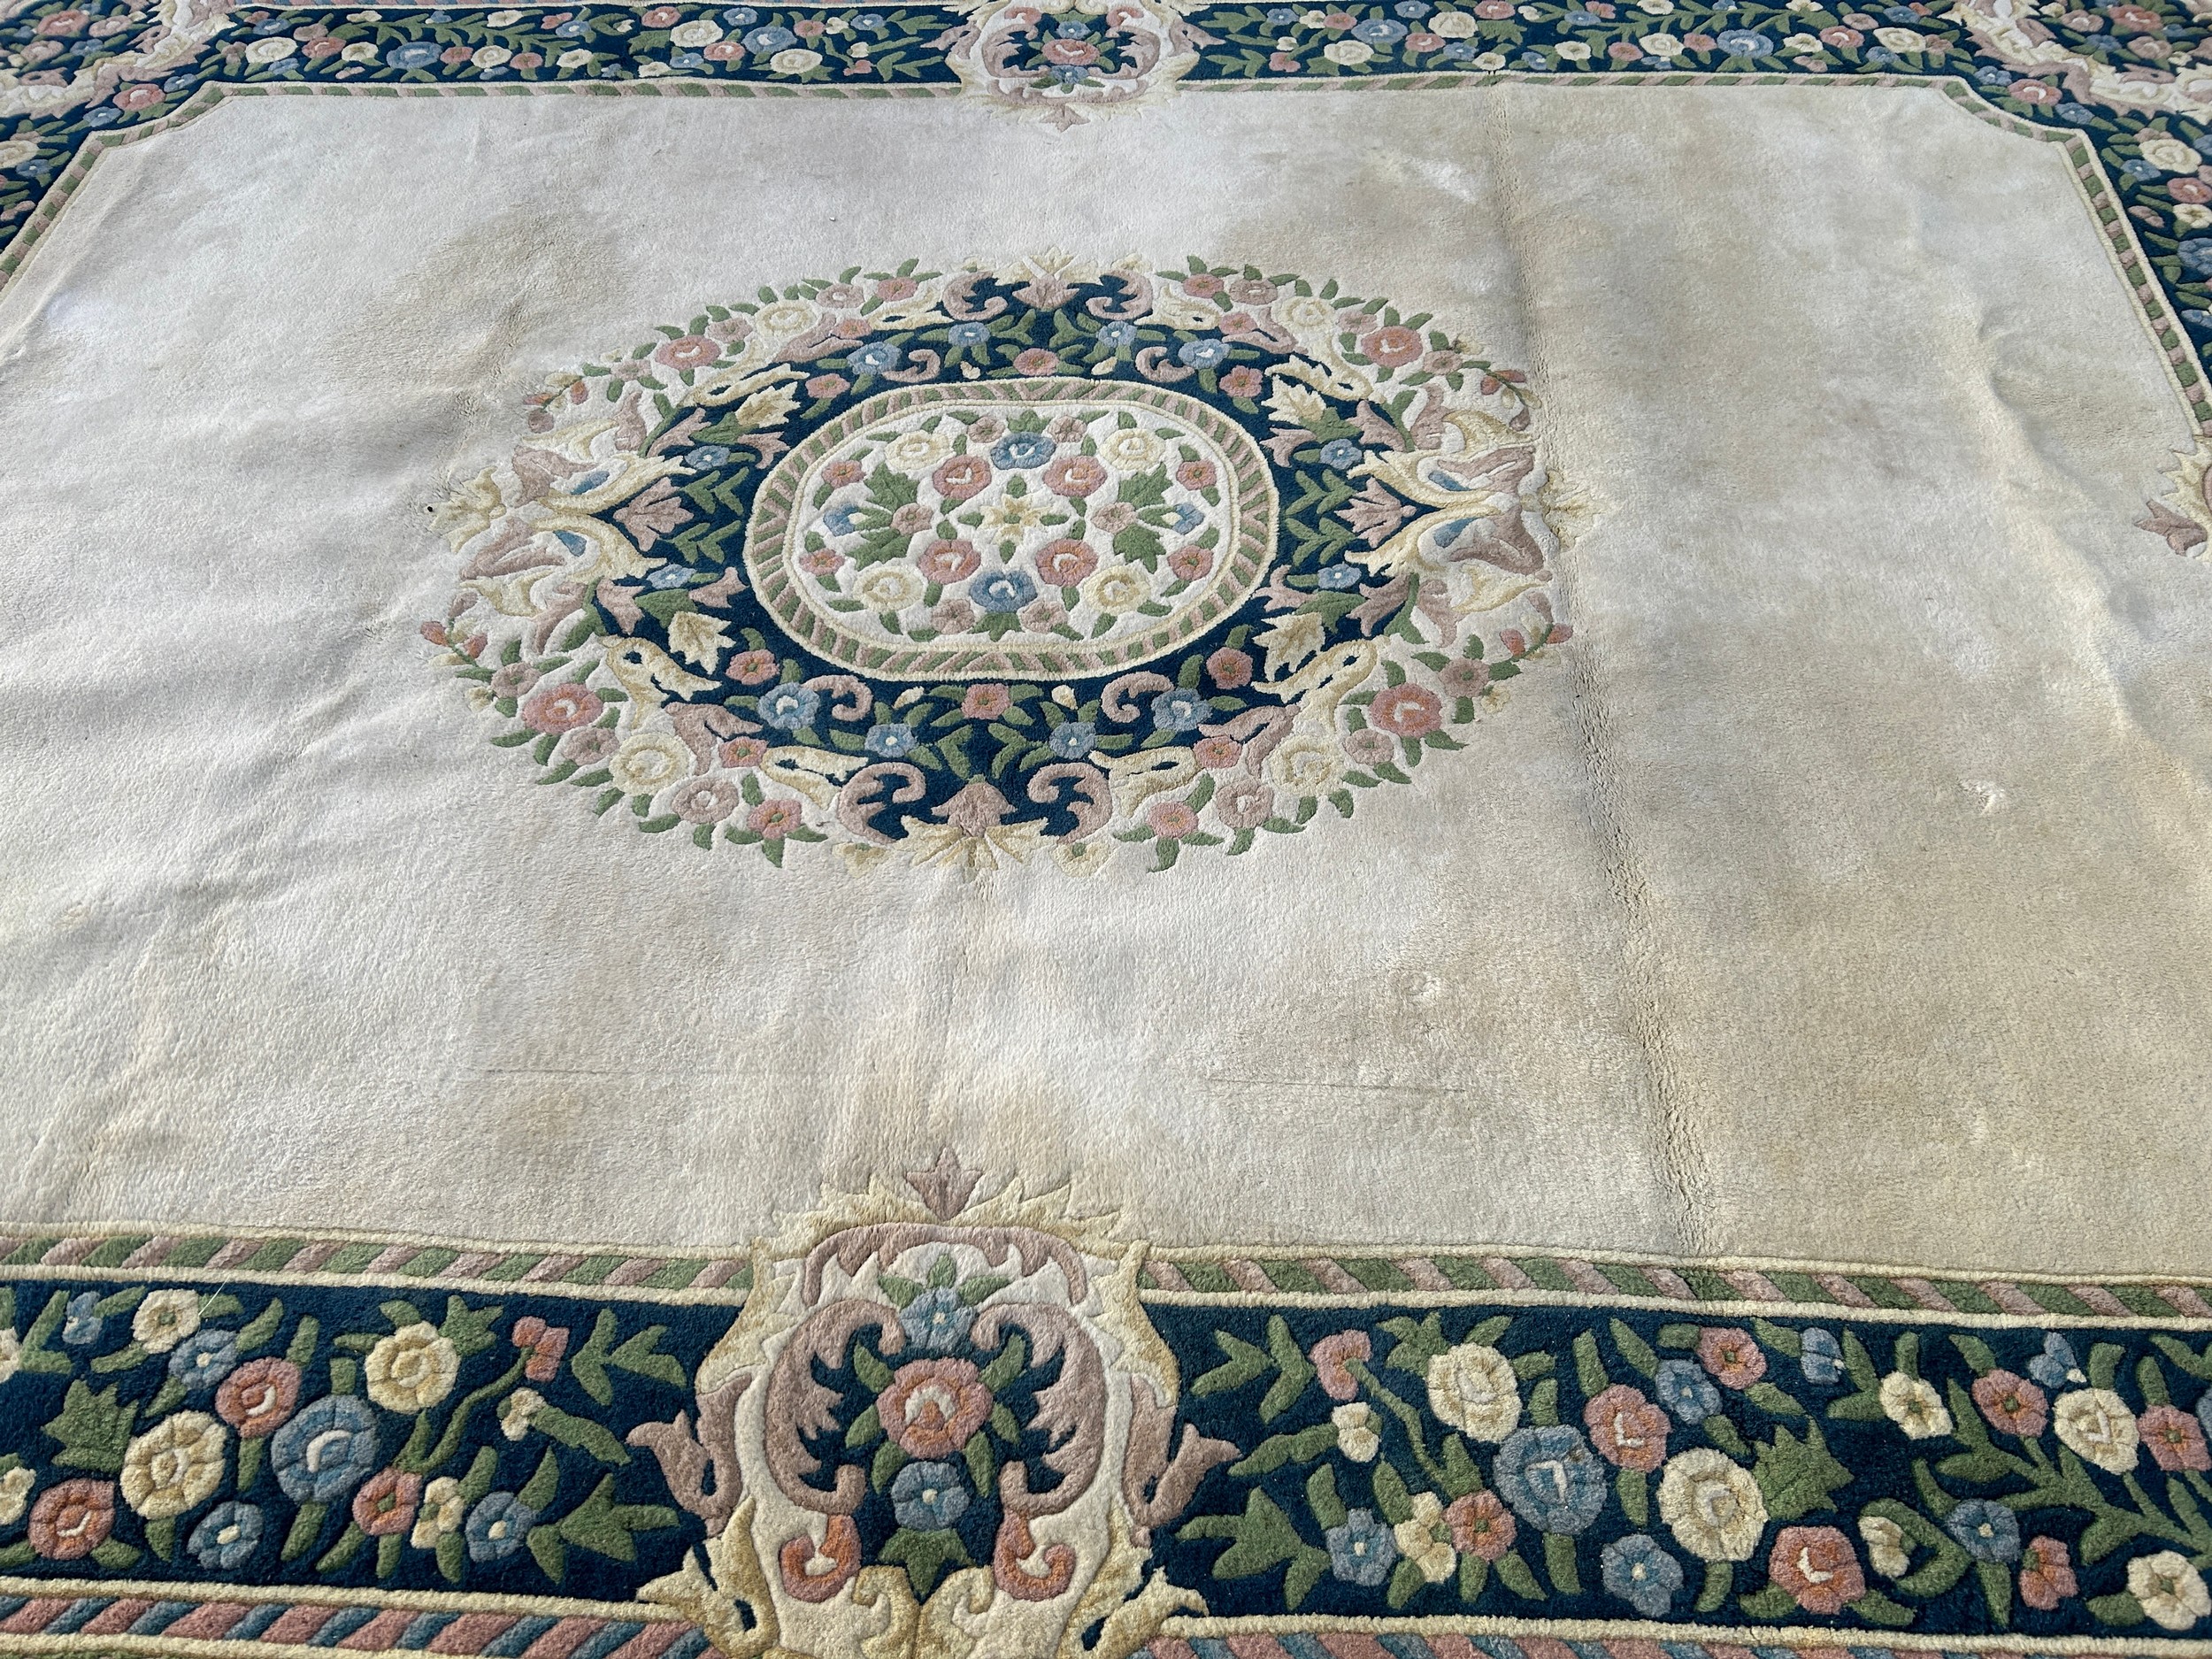 Large cream coloured patterned lounge rug, approximate measurements: 143 x 107 inches - Image 3 of 3